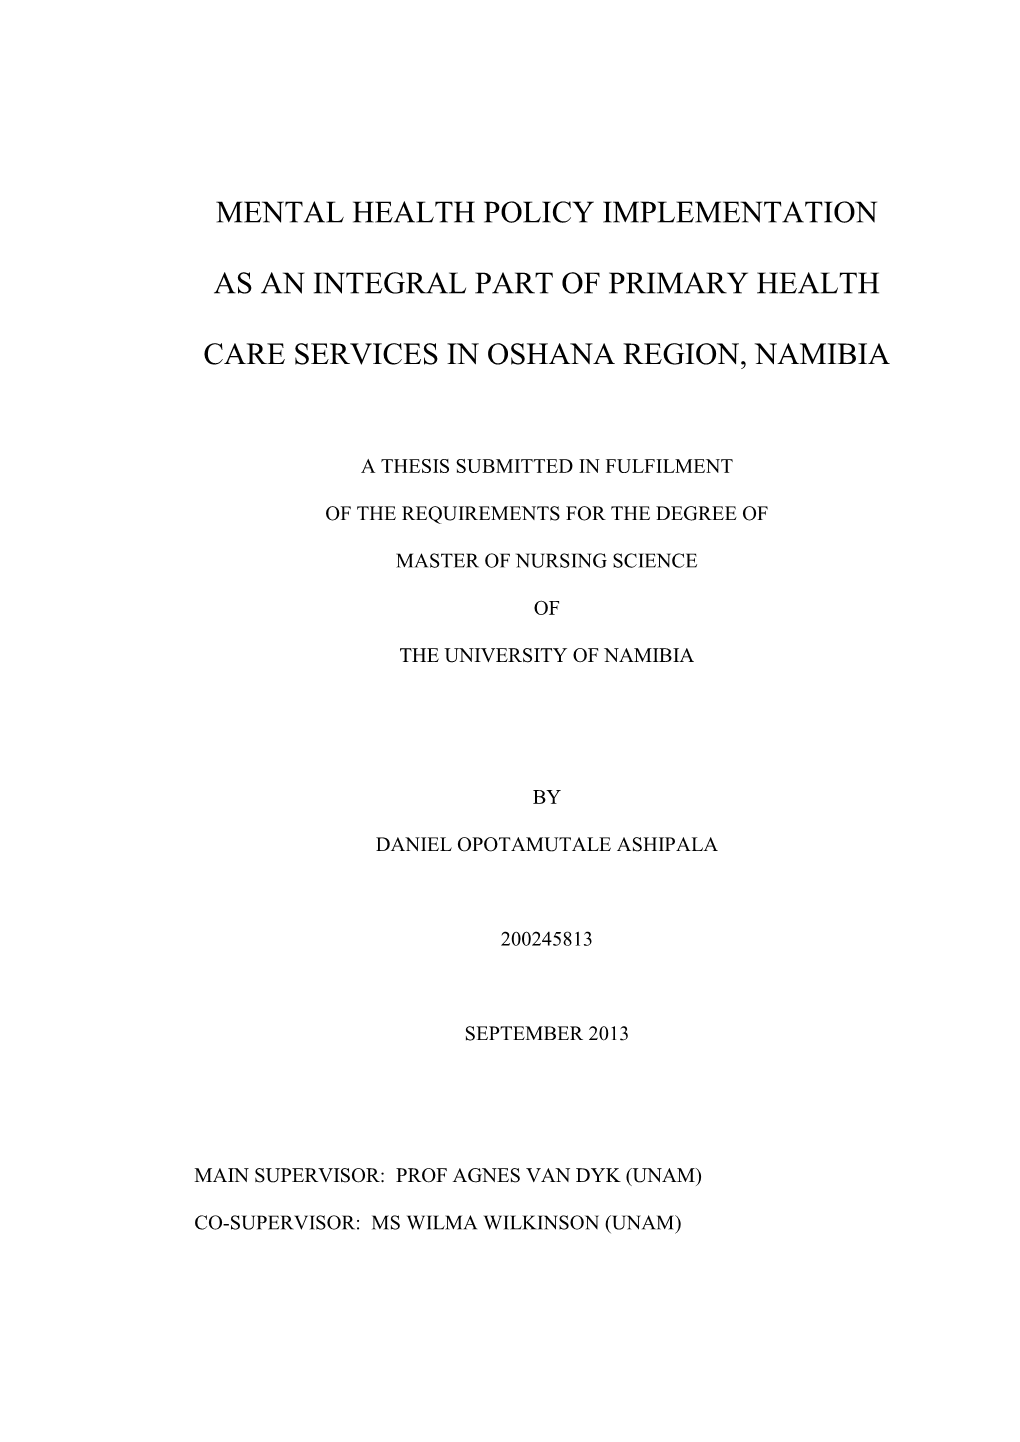 Mental Health Policy Implementation As an Integral Part of Primary Health Care Services in Oshana Region, Namibia